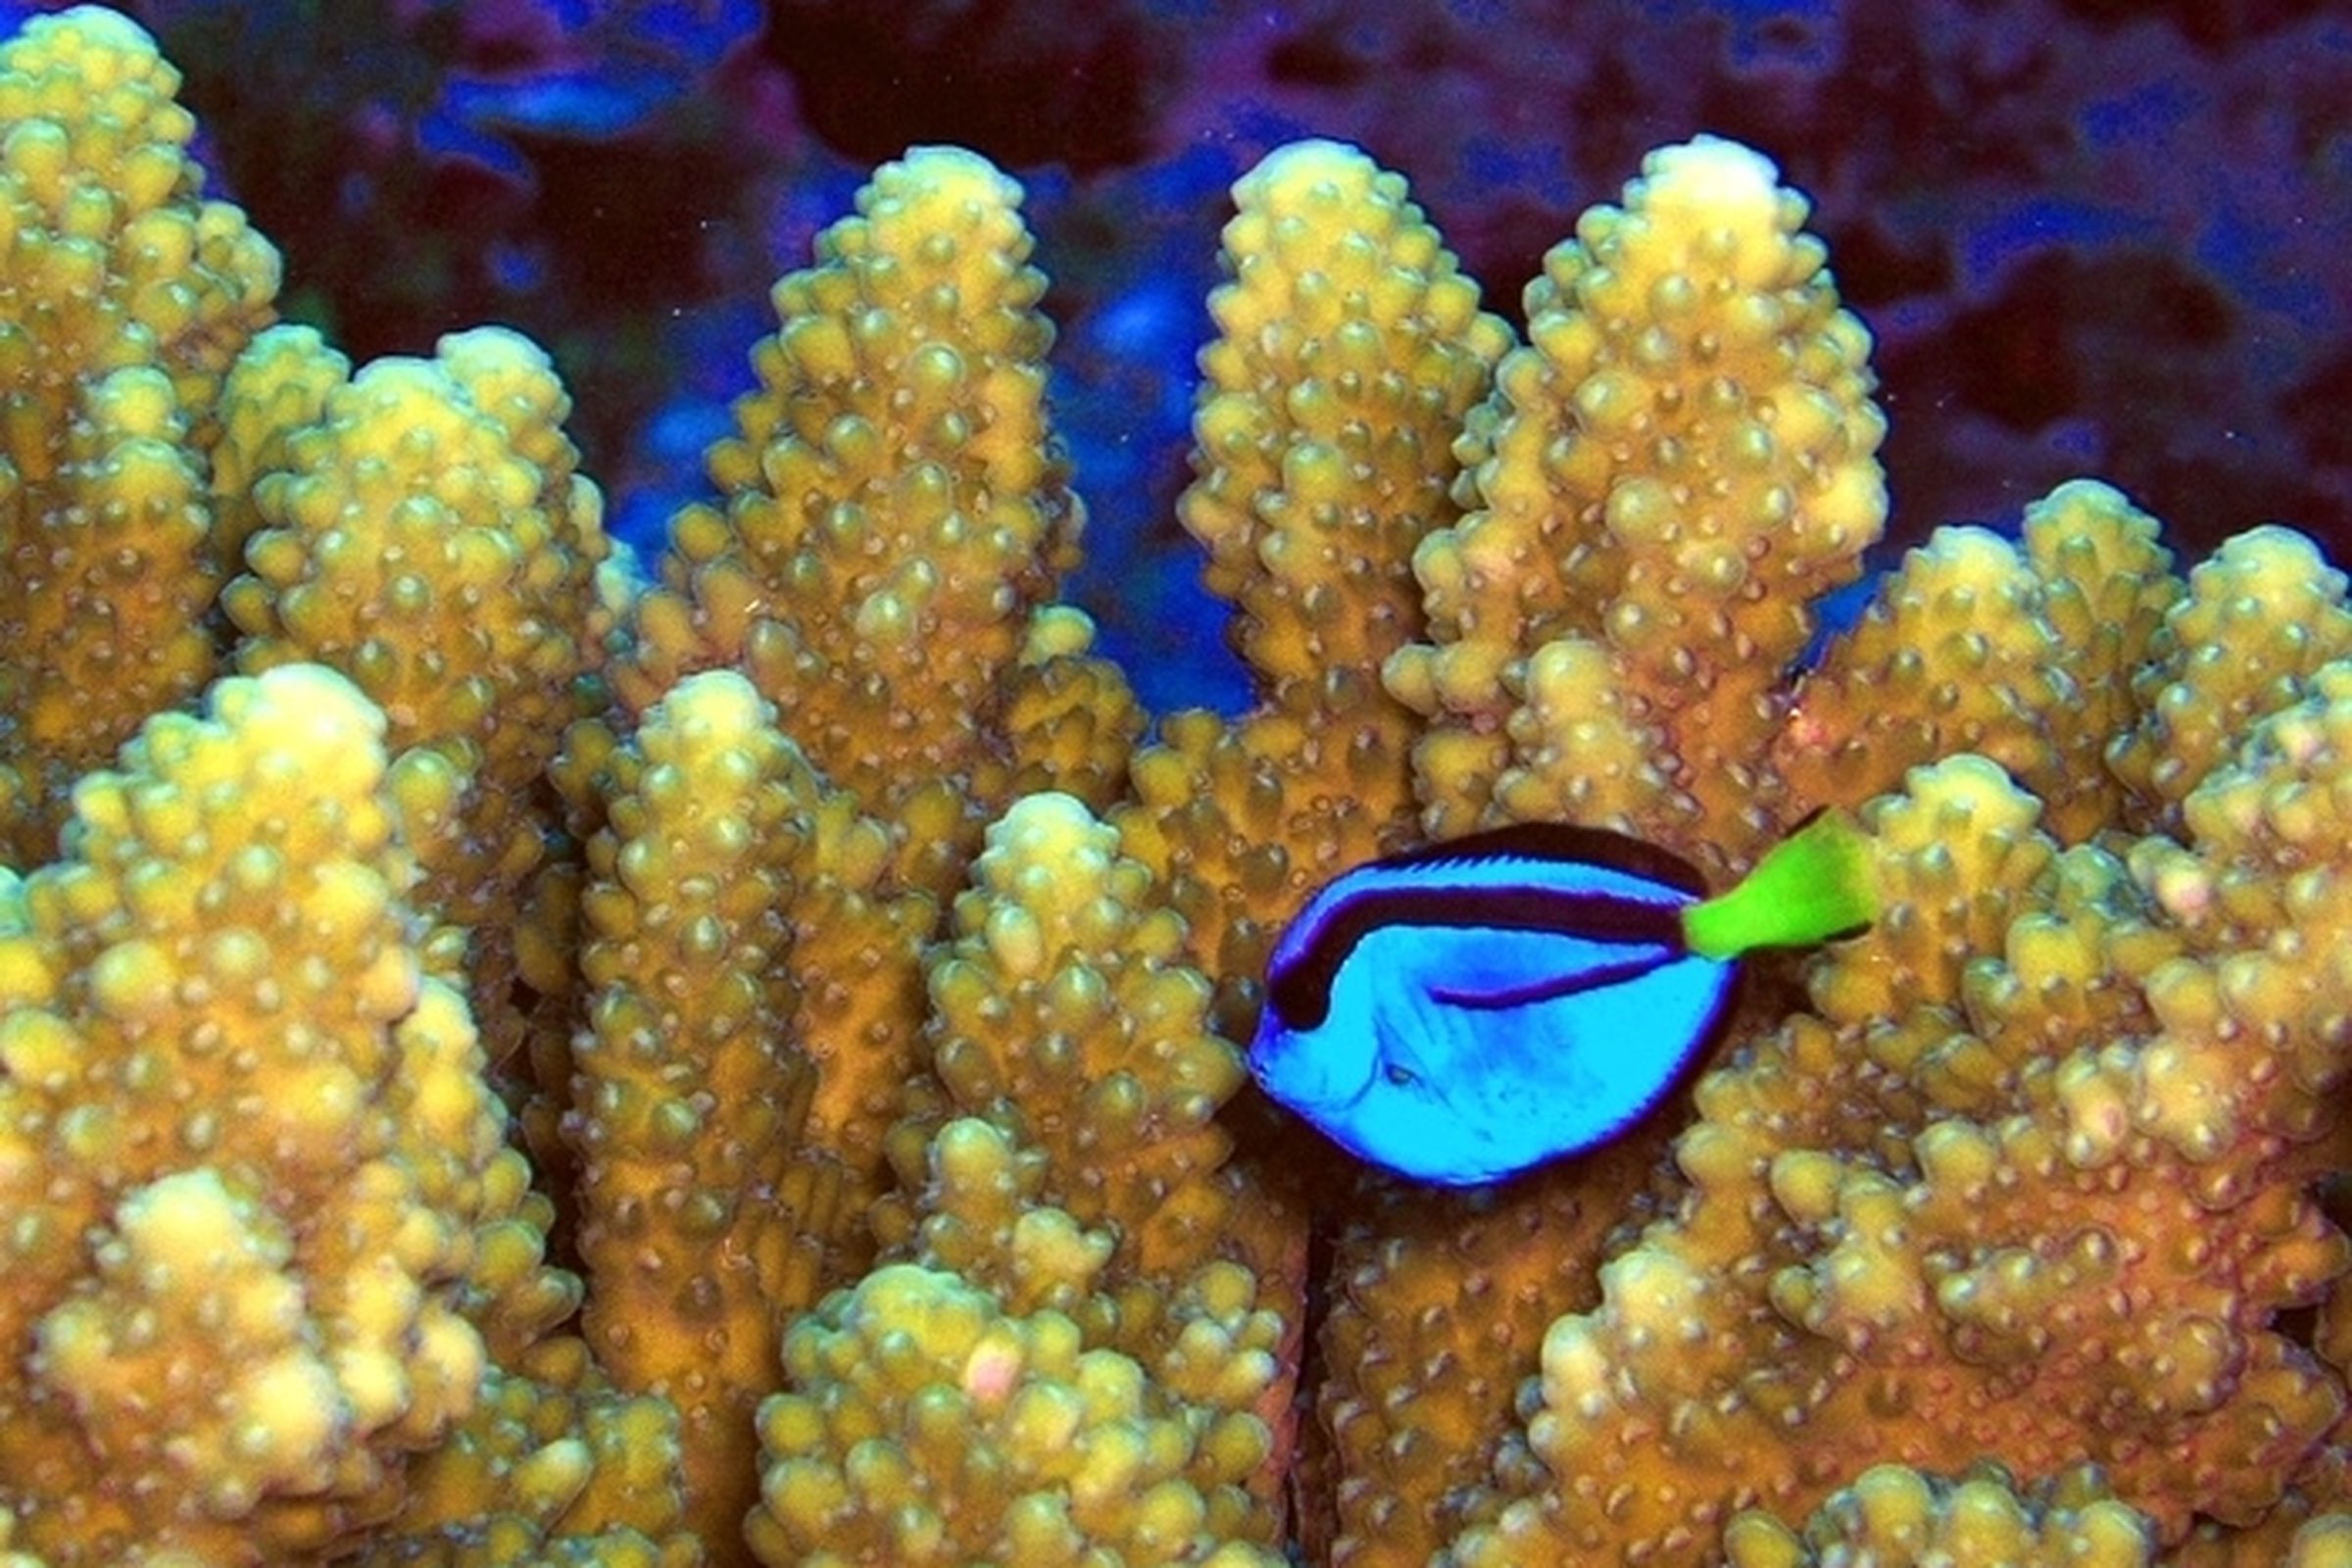 Blue tang fish swims in front of yellow coral in the Pacific Remote Islands National Wildlife Refuge Complex